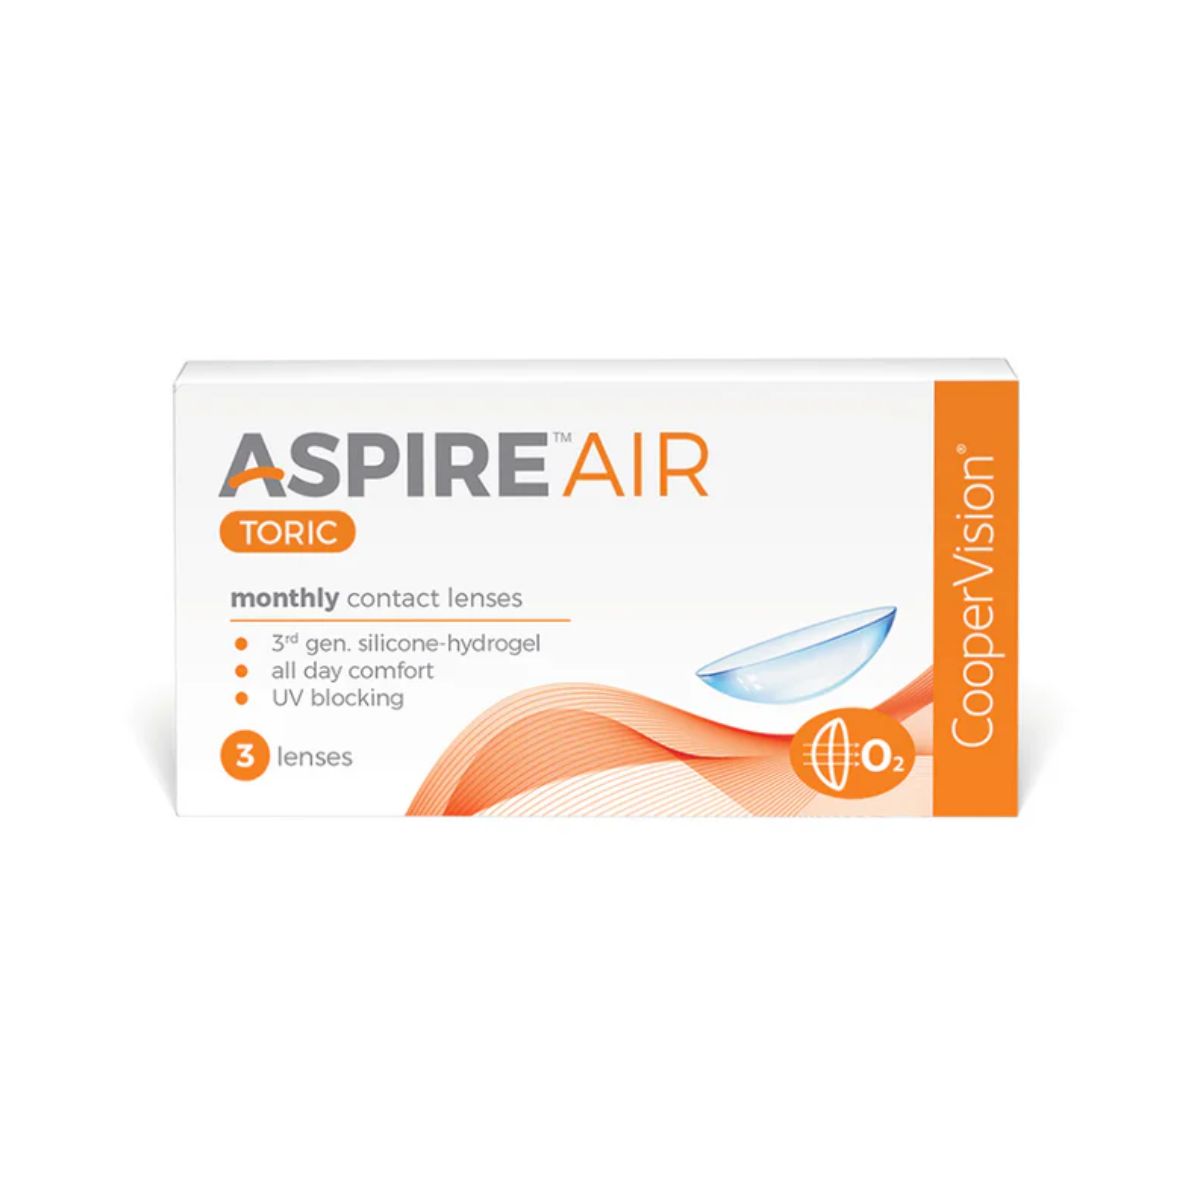 "Crisp Vision with Aspire Air Toric Monthly Disposable Contact Lenses OPTORIUM"